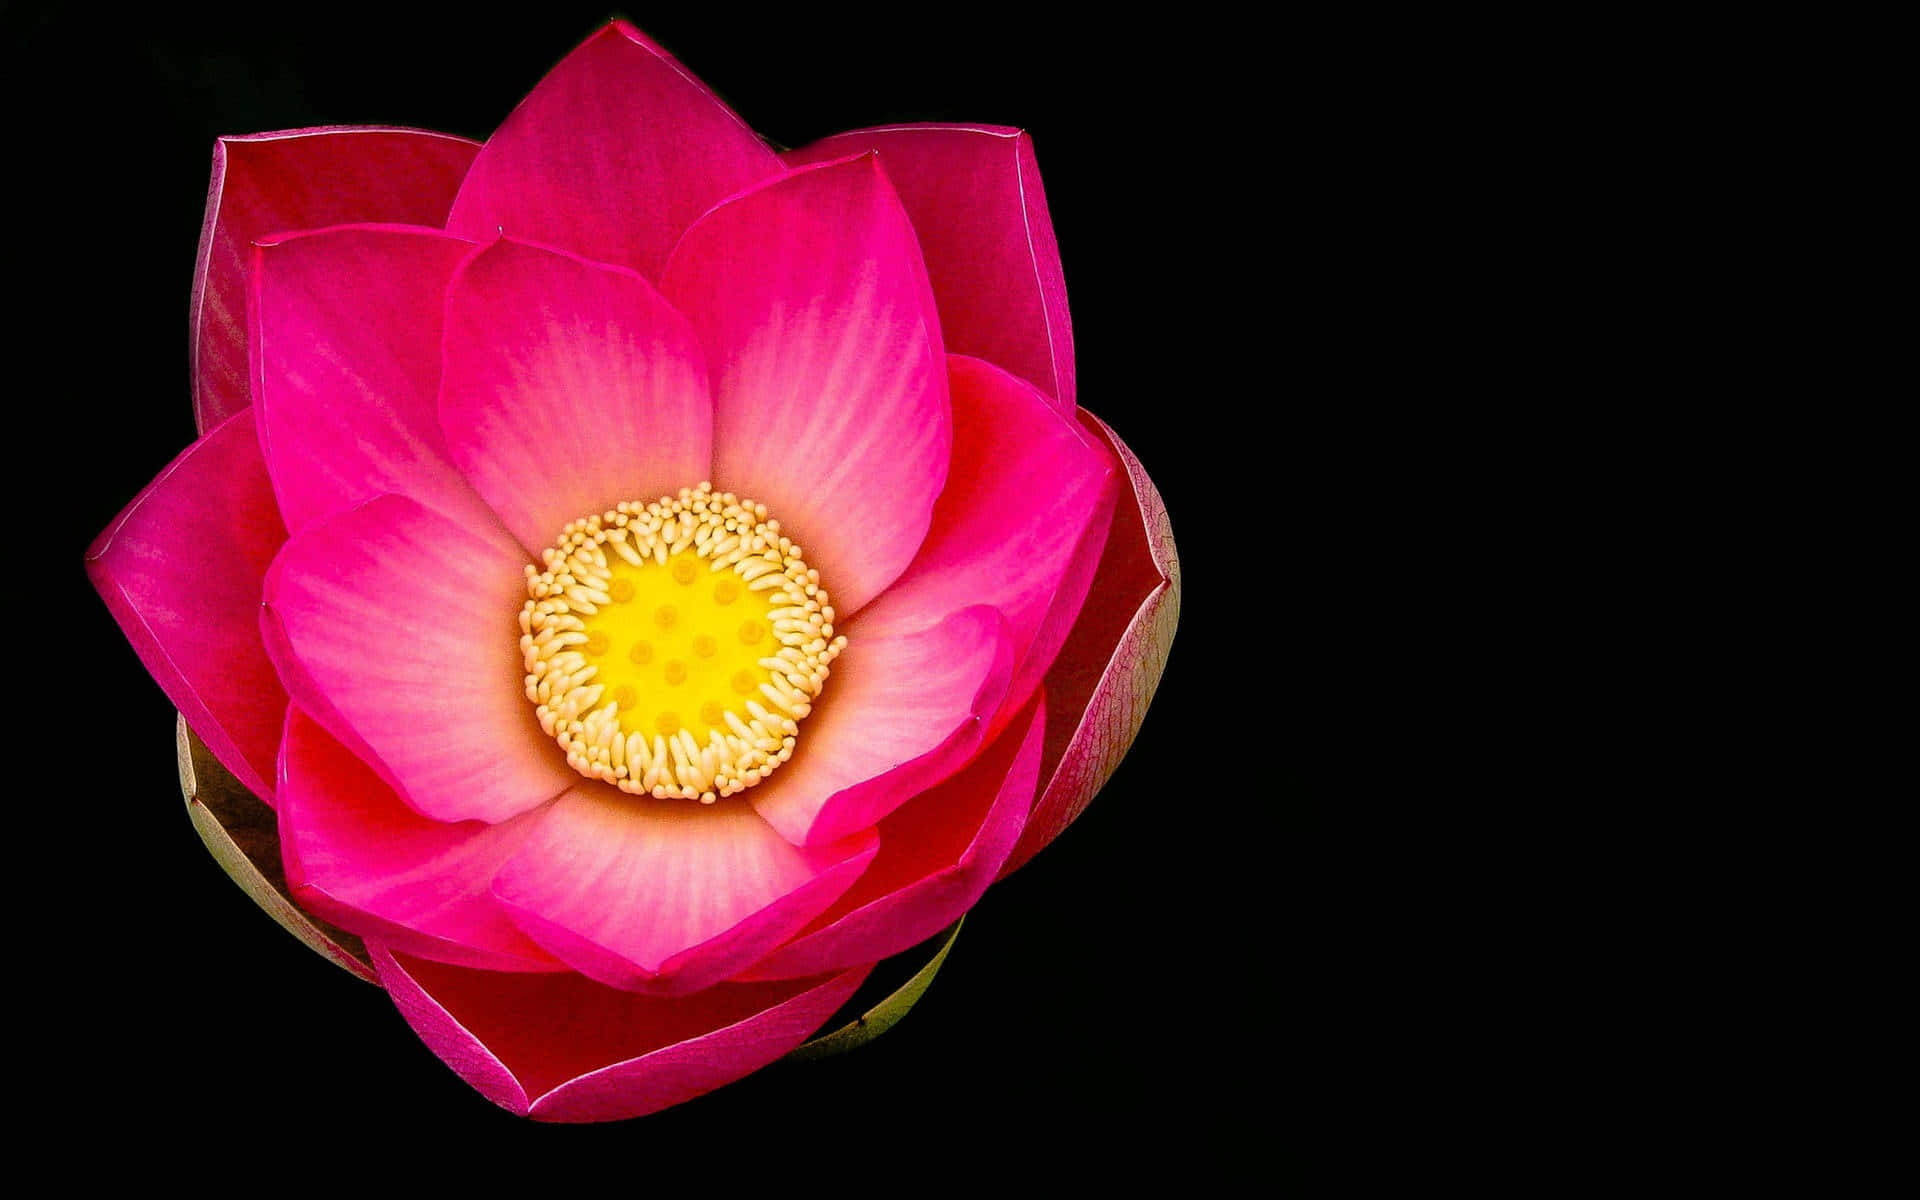 "Beauty blooms as the petals of the lotus flower open."